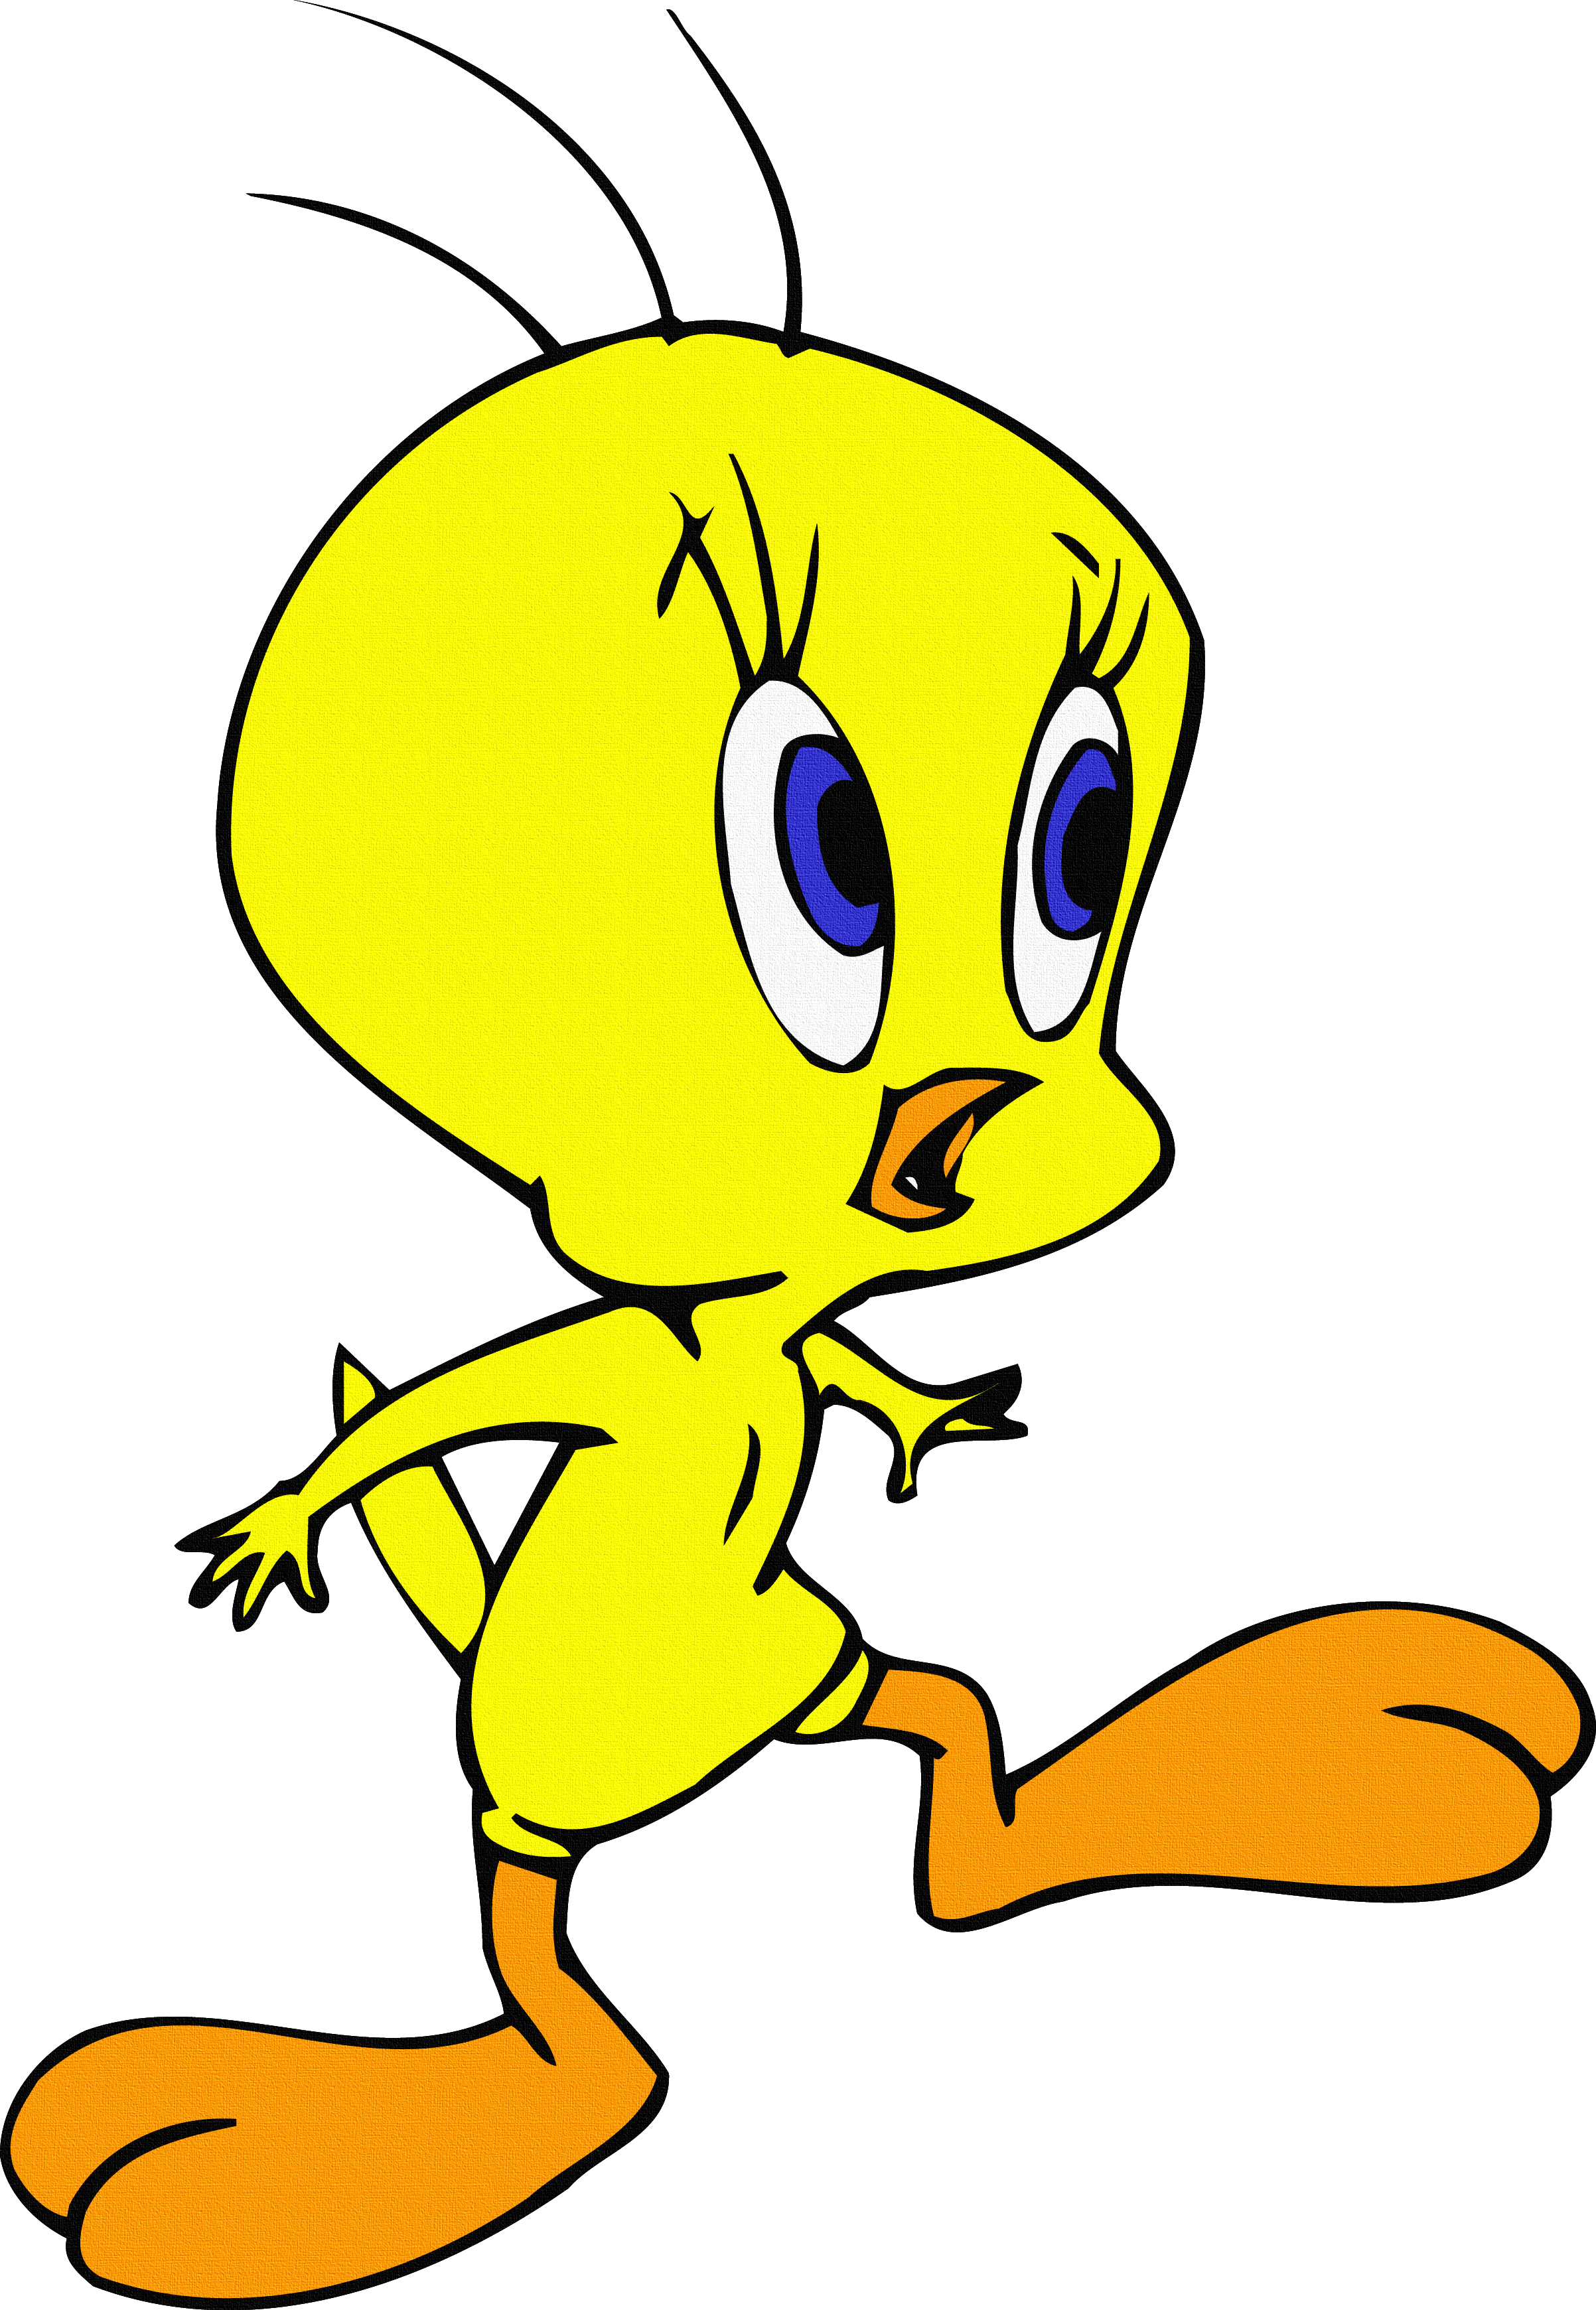 share clipart about Tweety Kuş - Good Cartoon Characters, Find more high qu...